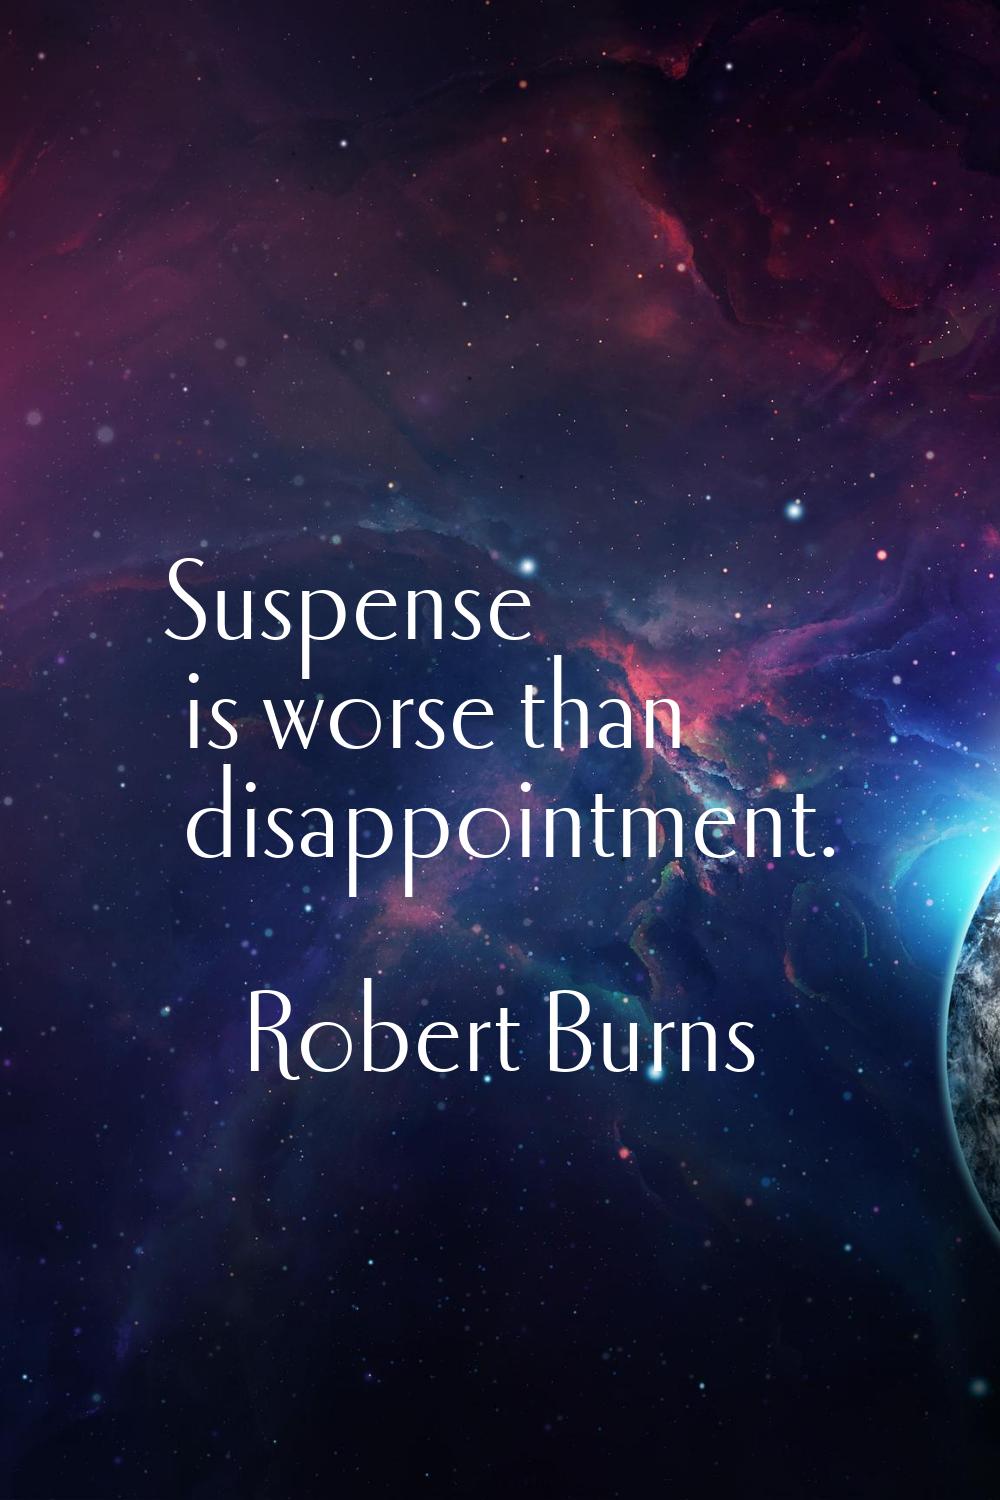 Suspense is worse than disappointment.